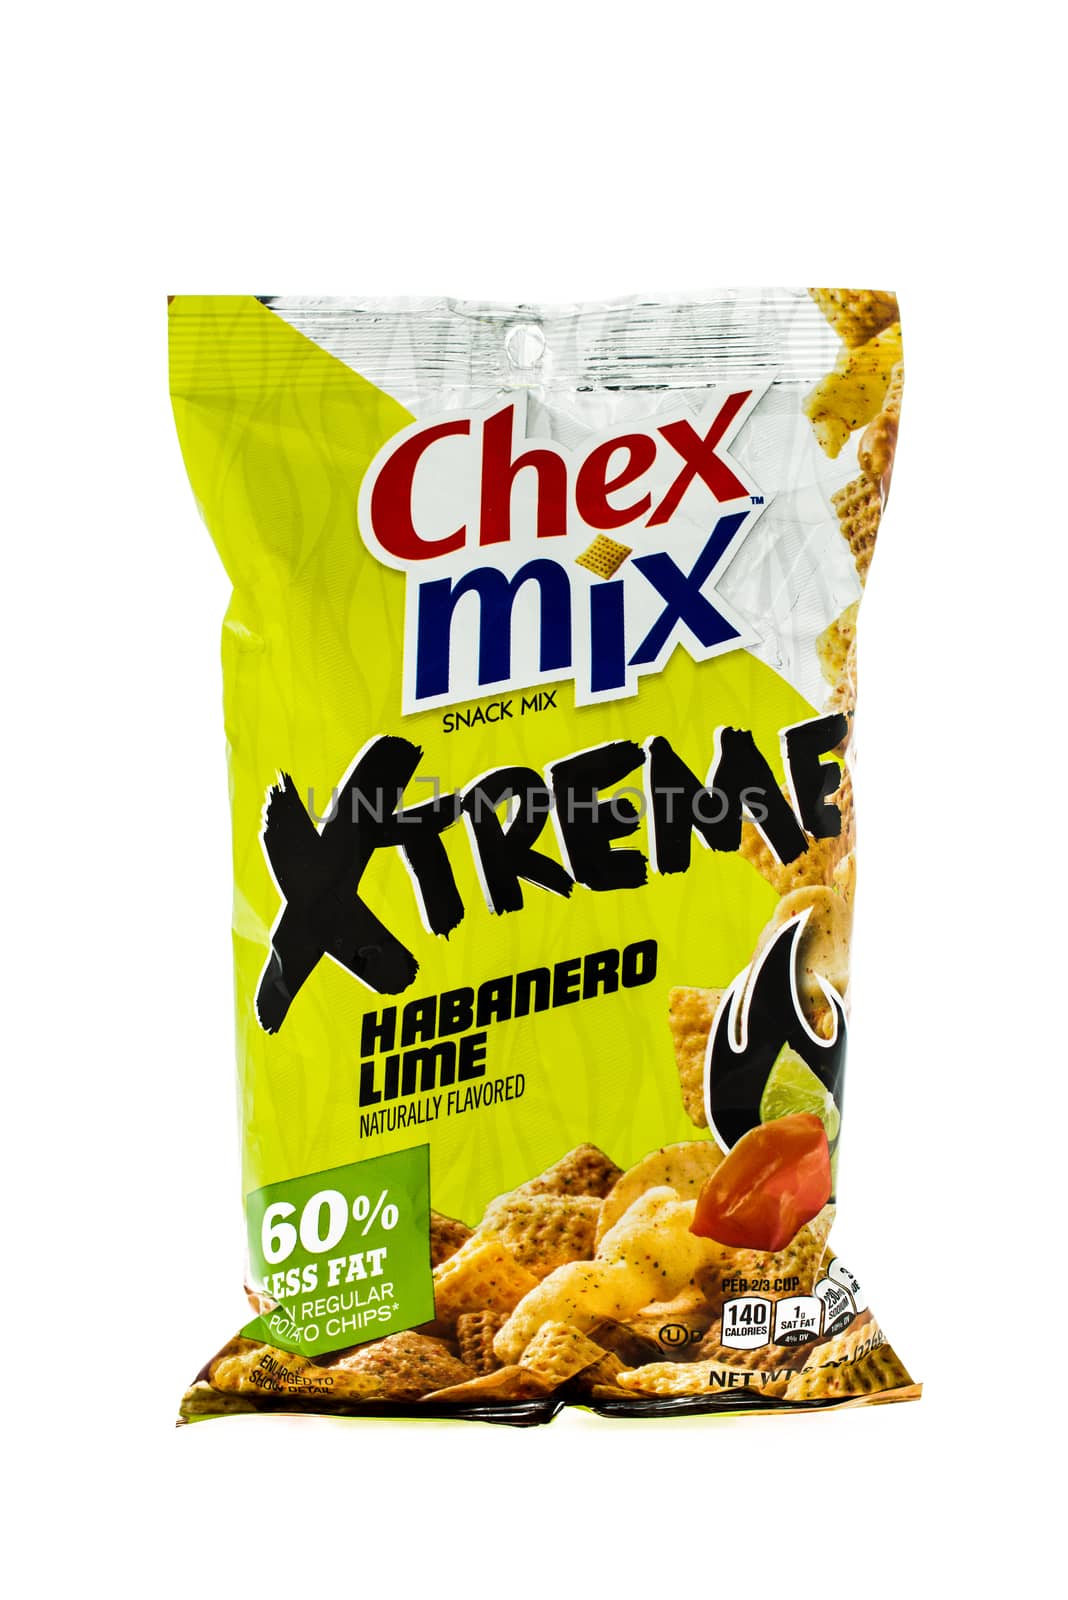 Winneconne, WI - 4 February 2015: Bag of Chex Mix Xtreme Habanero Lime snack mix. Created in 1985 as pre-packaged and is now owned by General Mills.